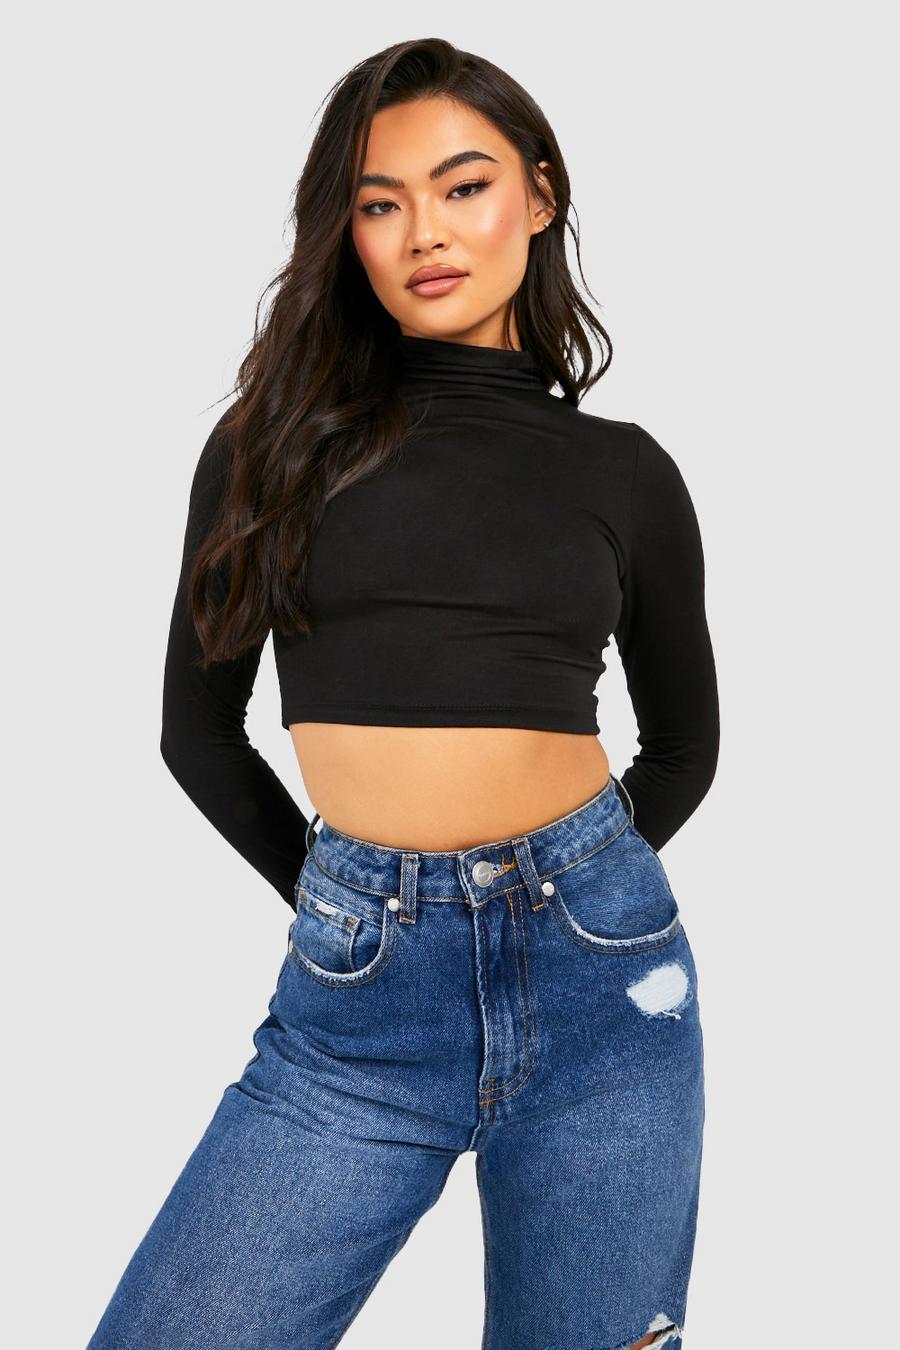 Kleding Dameskleding Tops & T-shirts Croptops & Bandeautops Croptops This Is My Too Tired To Function Shirt  Cropped T-Shirt 